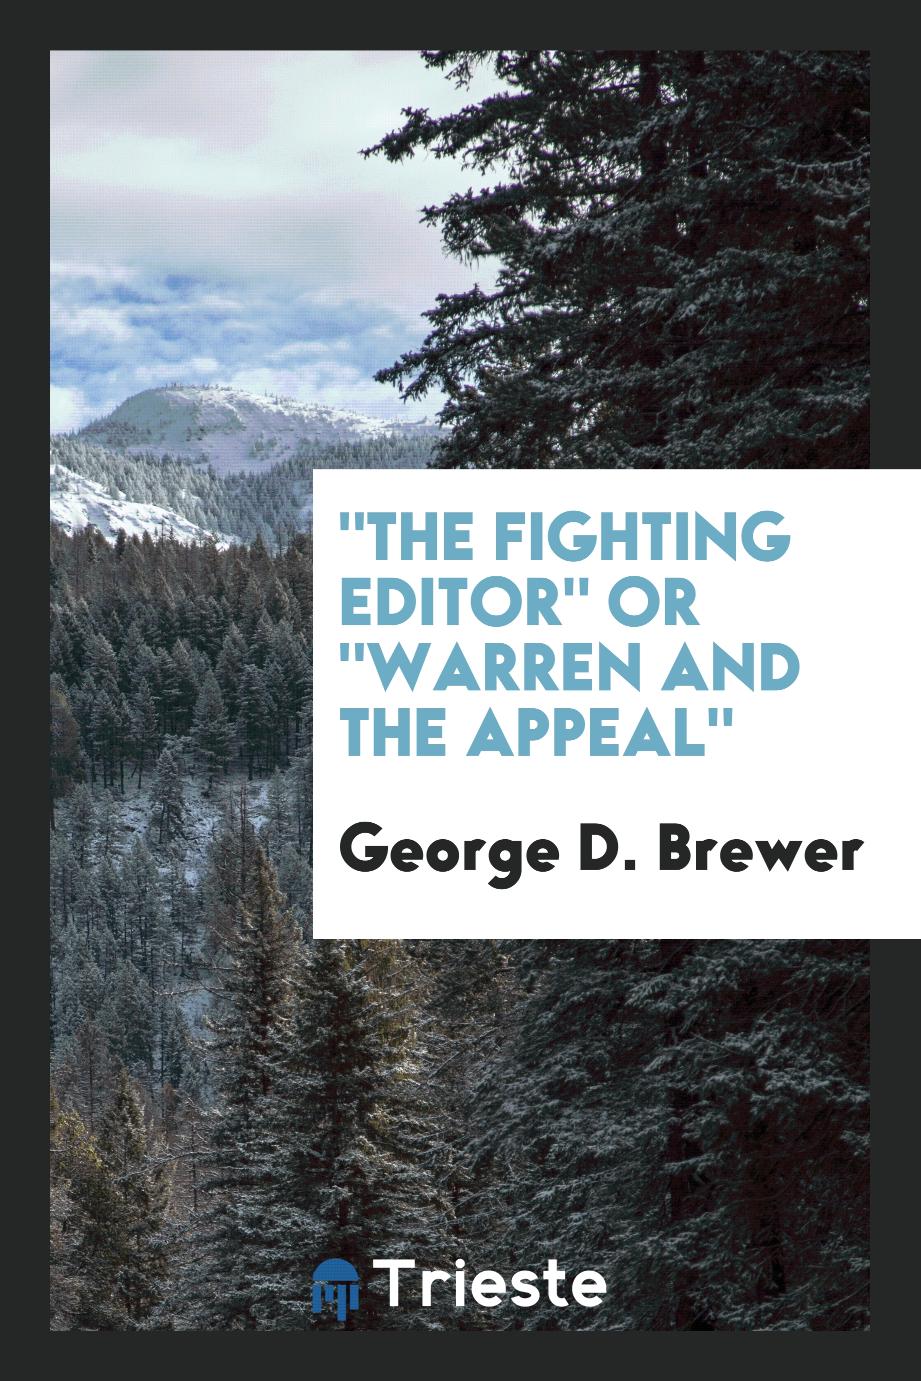 "The fighting editor" or "Warren and the Appeal"